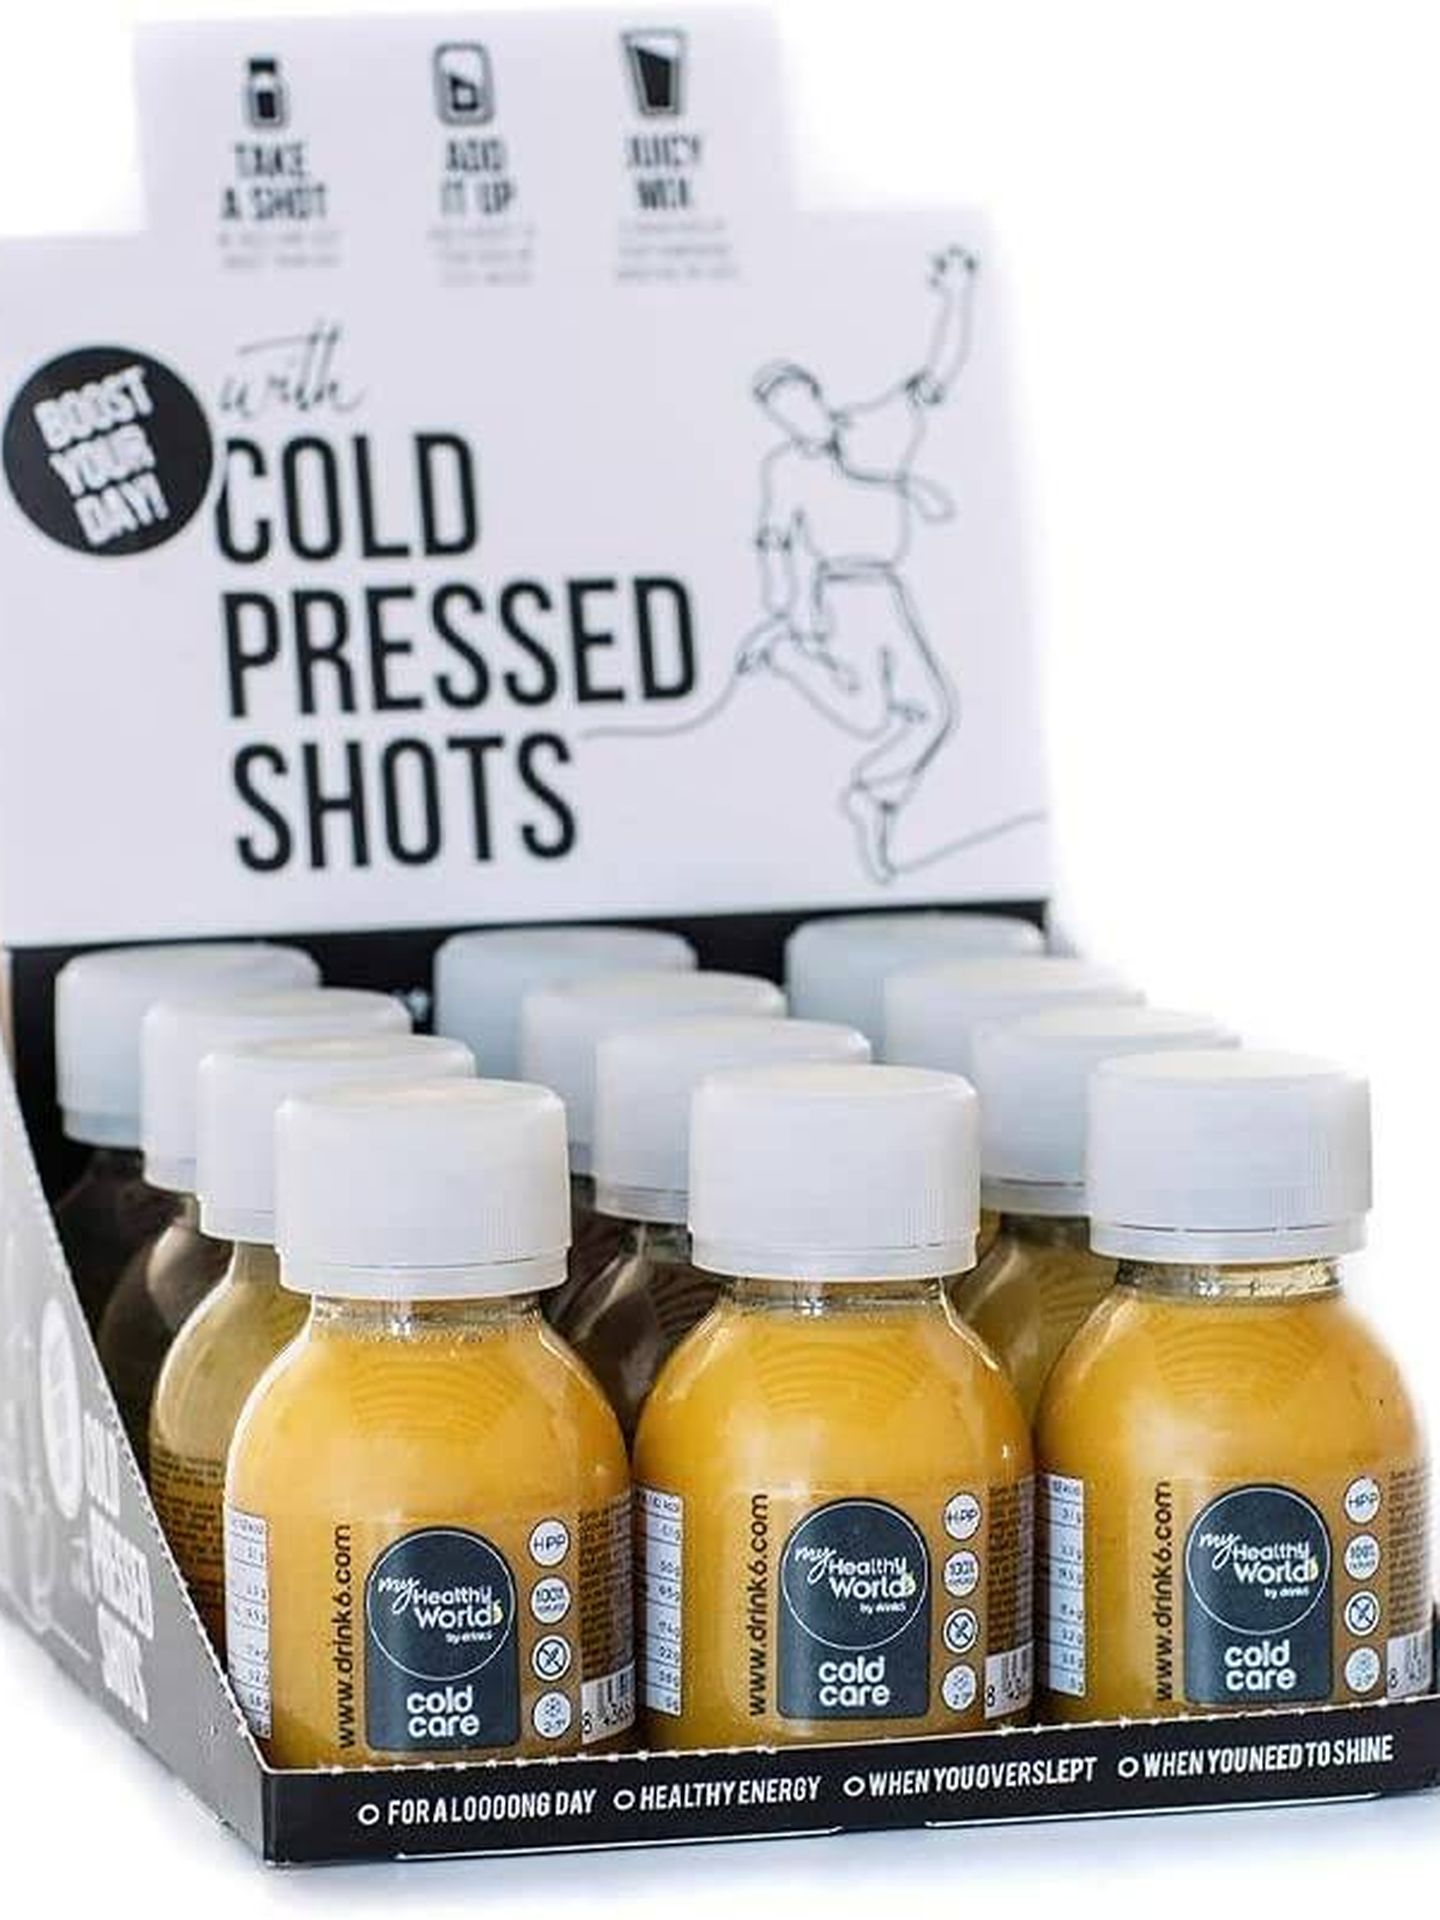 Cold Pressed Shots.